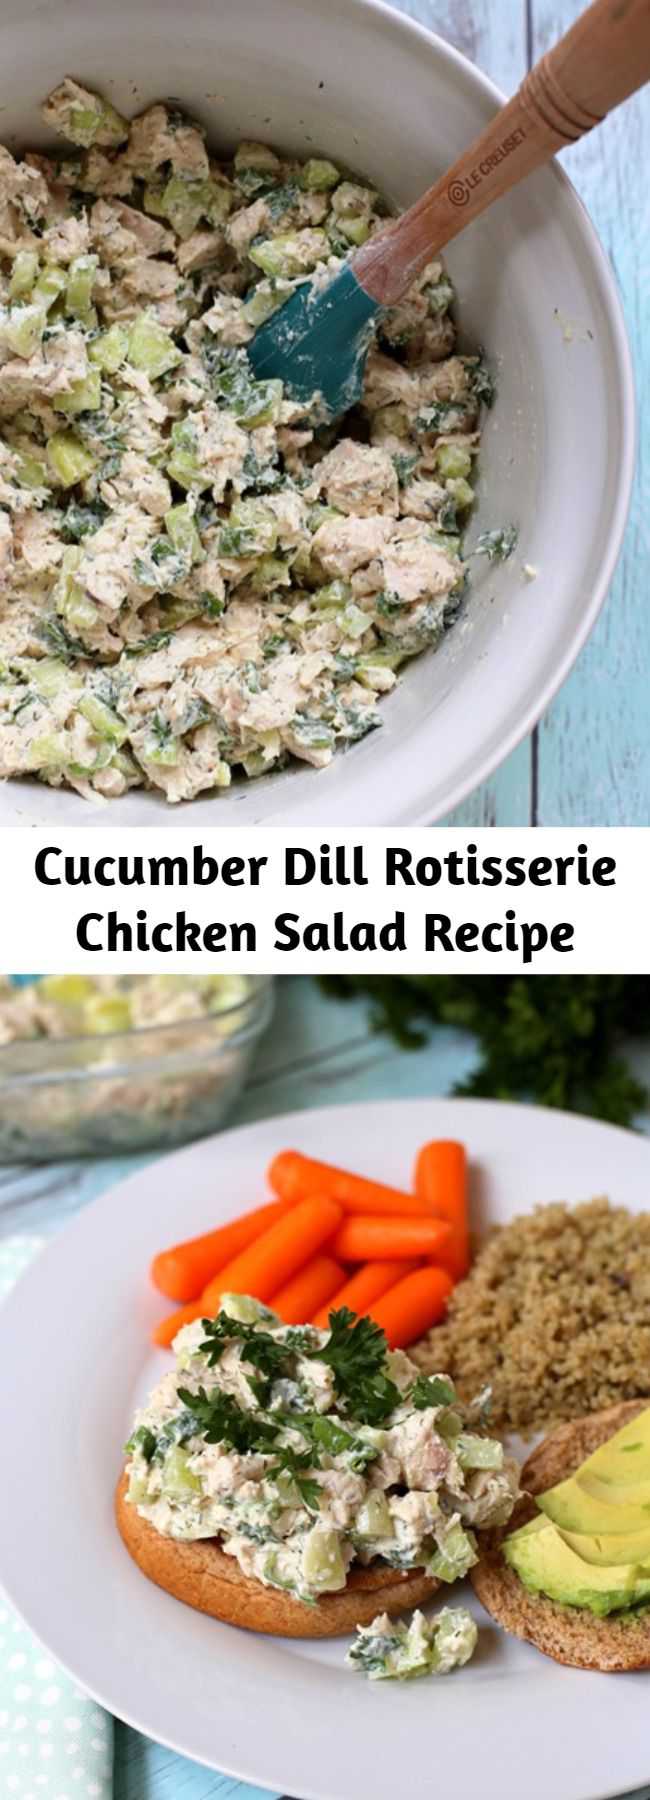 Cucumber Dill Rotisserie Chicken Salad Recipe - This recipe for lightened-up Cucumber Dill Greek Yogurt Rotisserie Chicken Salad comes together in less than 10 minutes and tastes like summer in a bowl thanks to crisp cucumber and flavorful herbs. Made with Greek yogurt, it’s a protein-packed salad that will fill you up without making you feel weighed down!